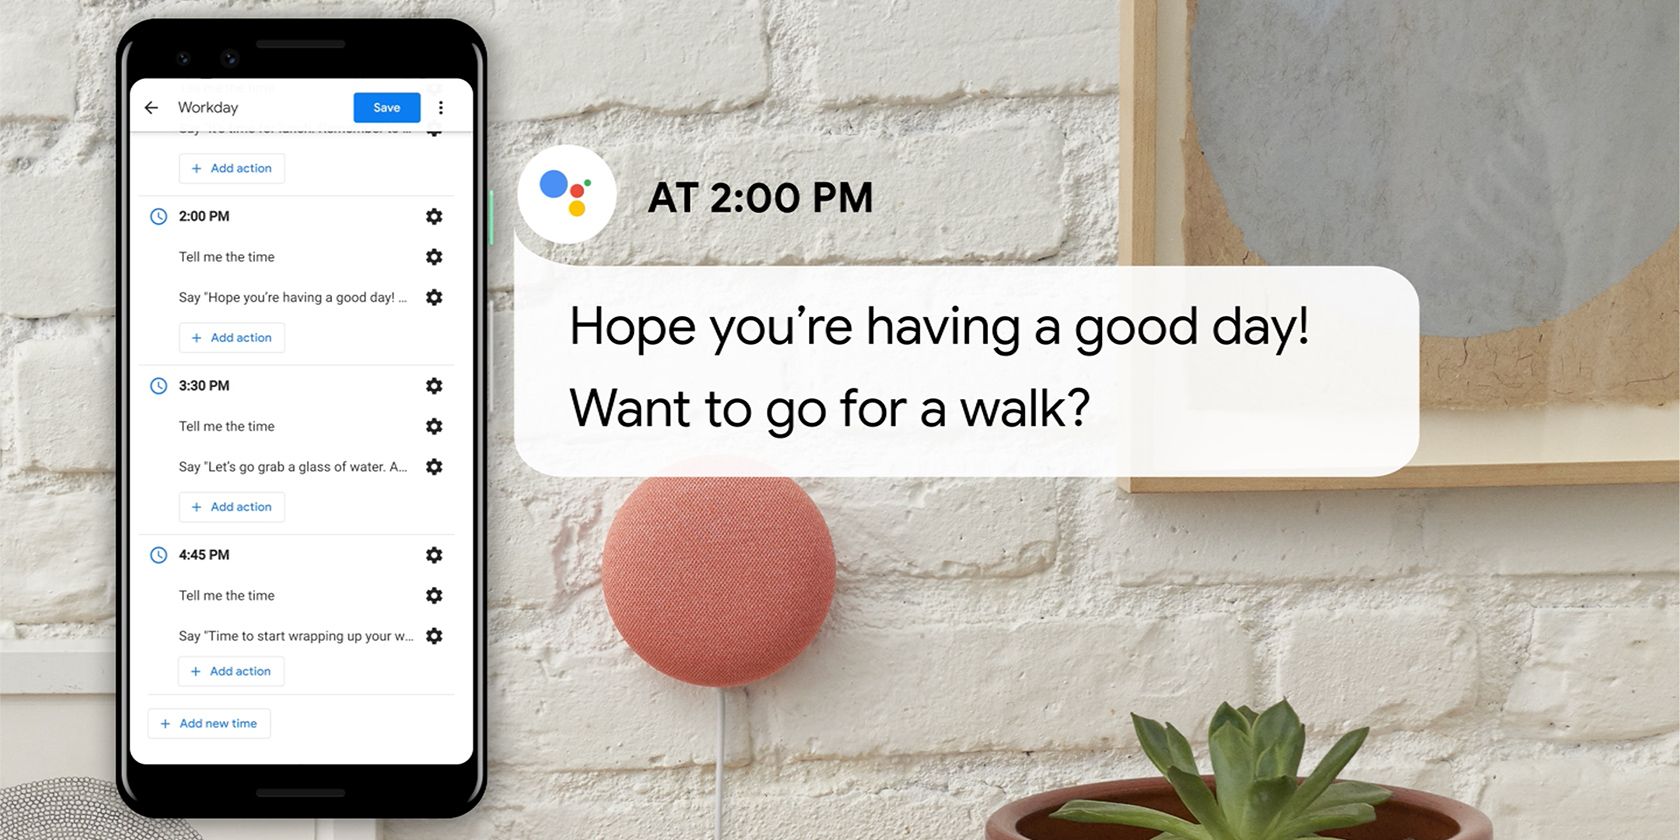 Google Assistant Workday routines